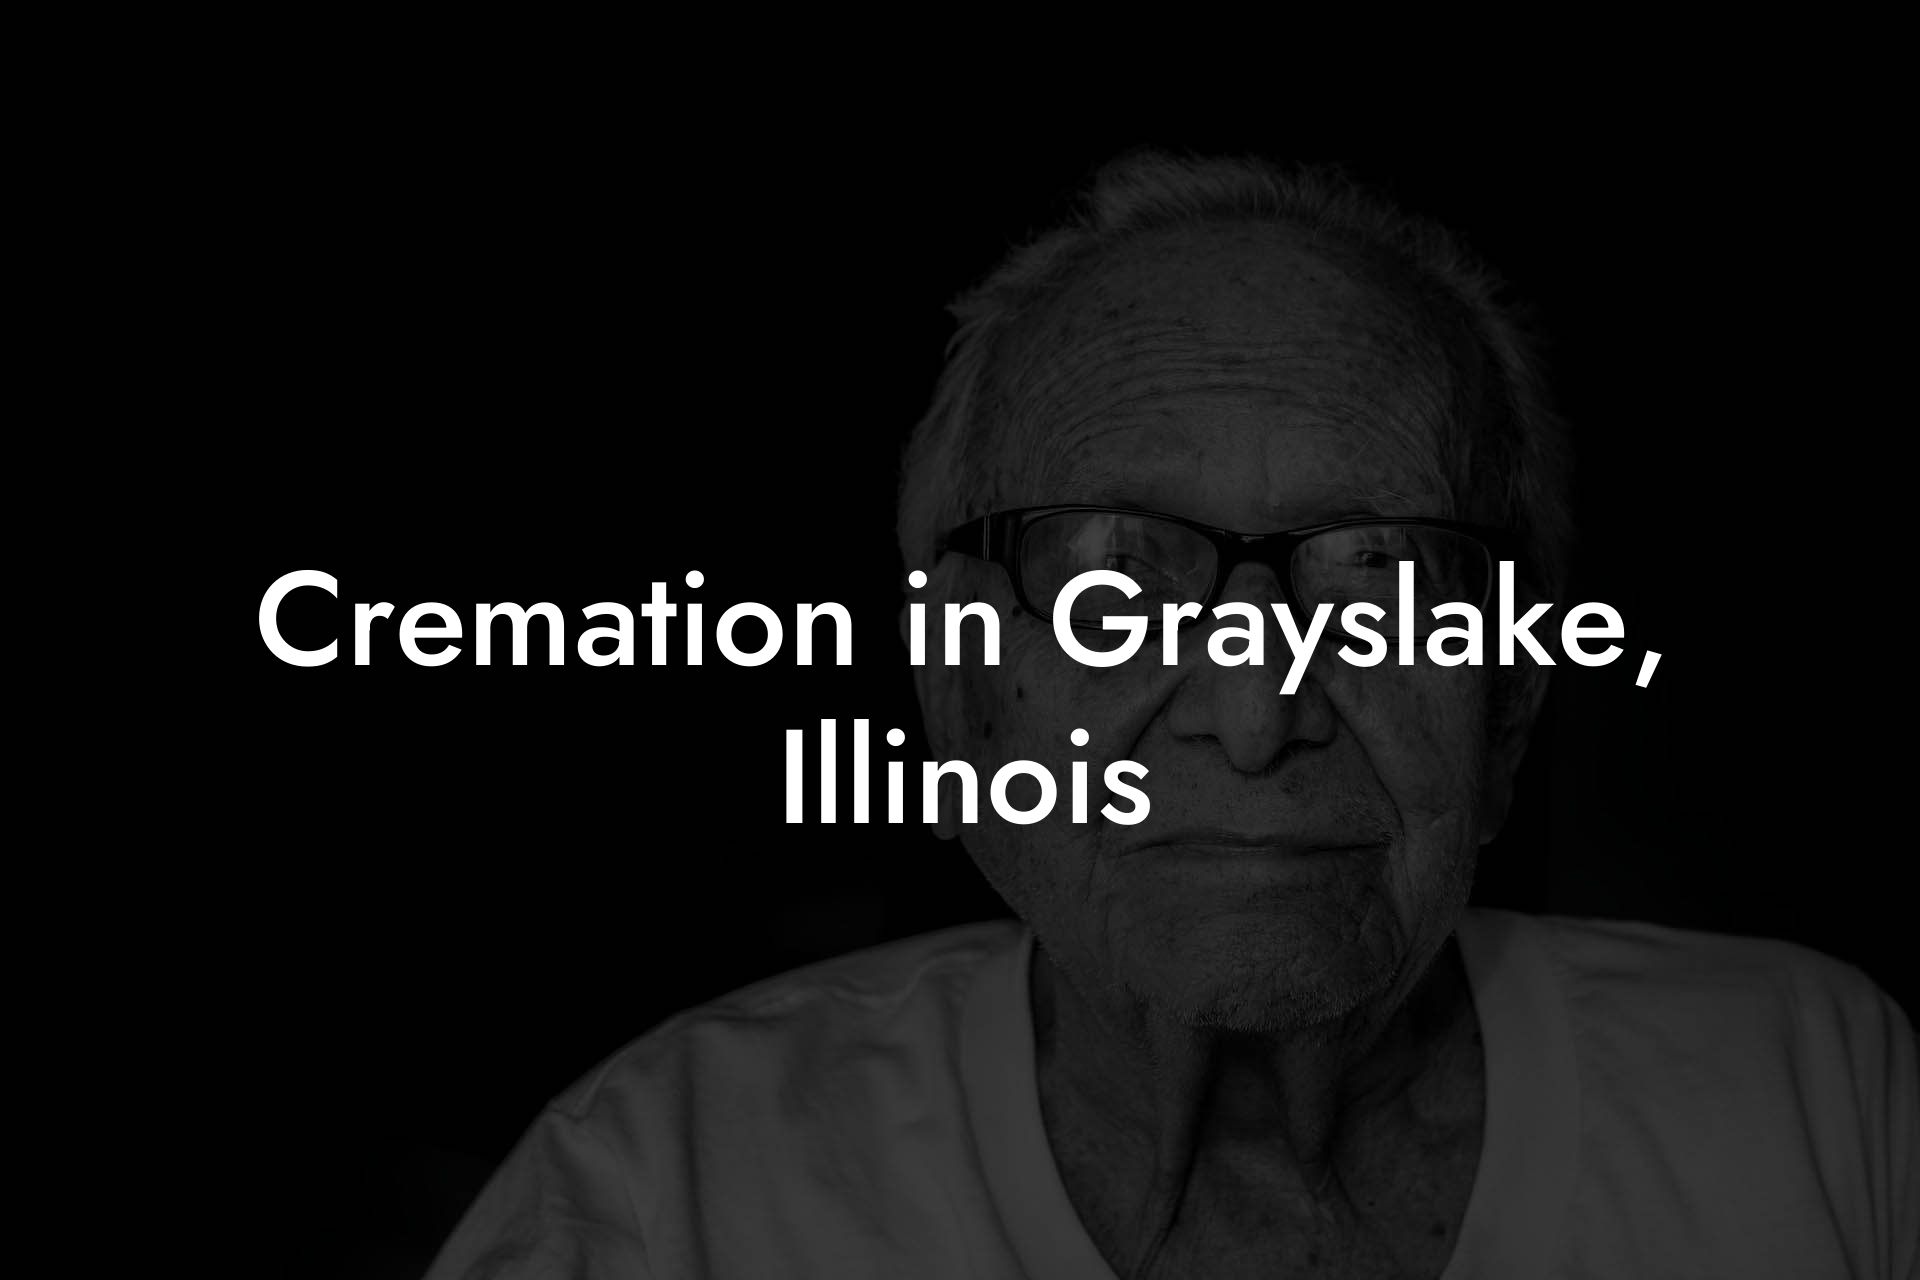 Cremation in Grayslake, Illinois